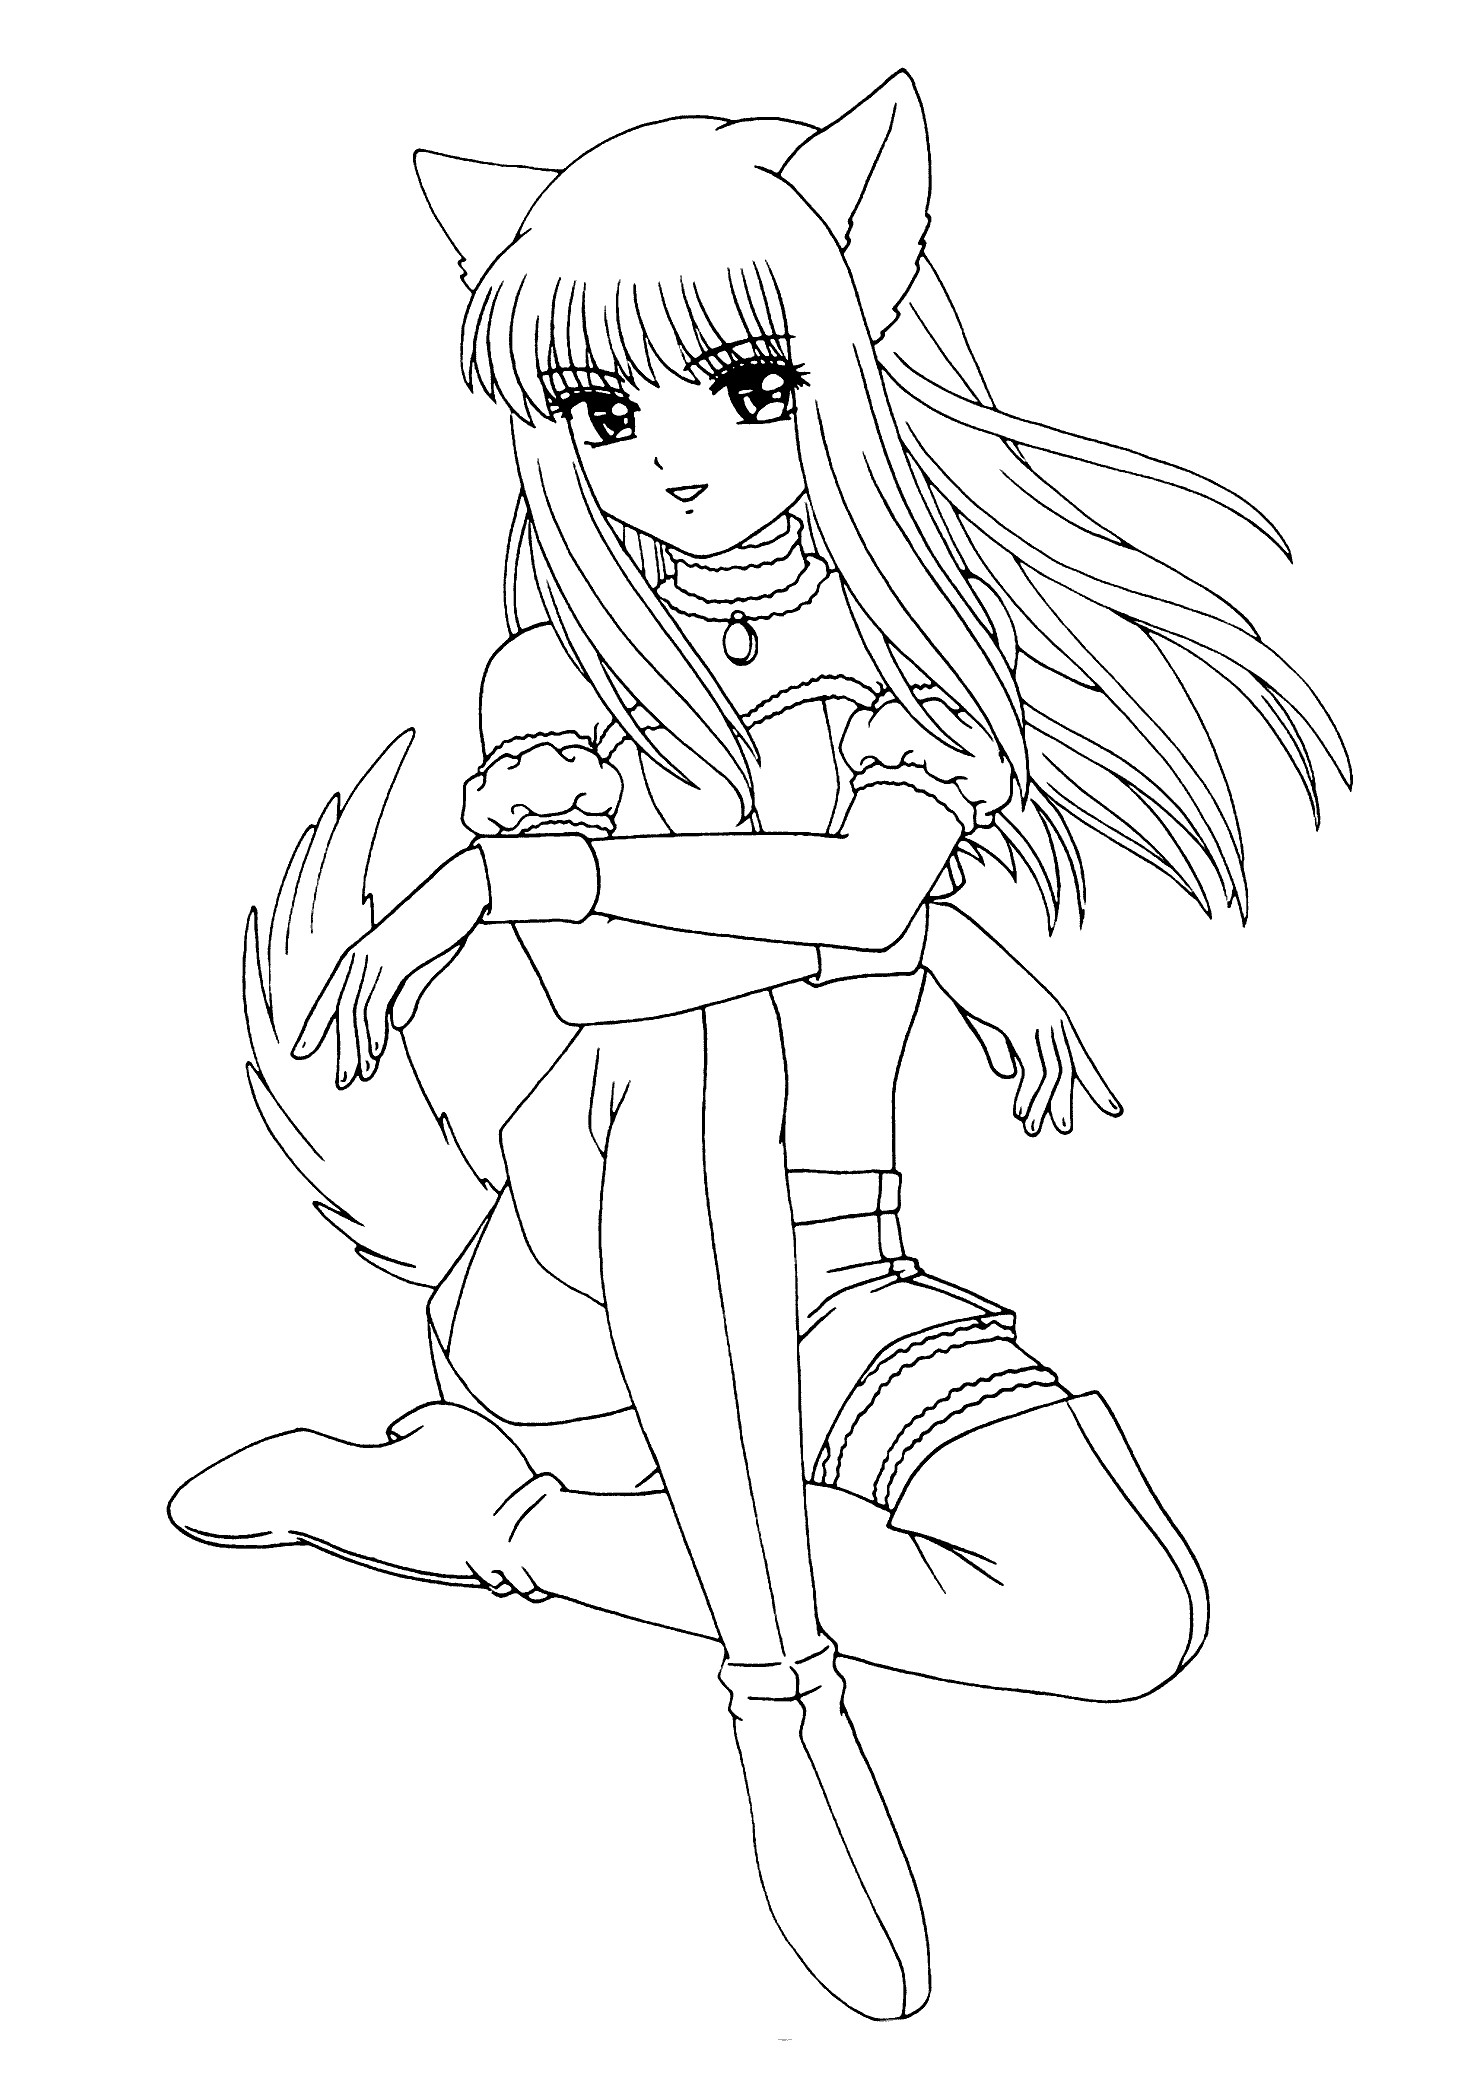 Coloring Pages For Teens Emo Anime
 13 Best of Anime Girl Coloring Pages Bestofcoloring